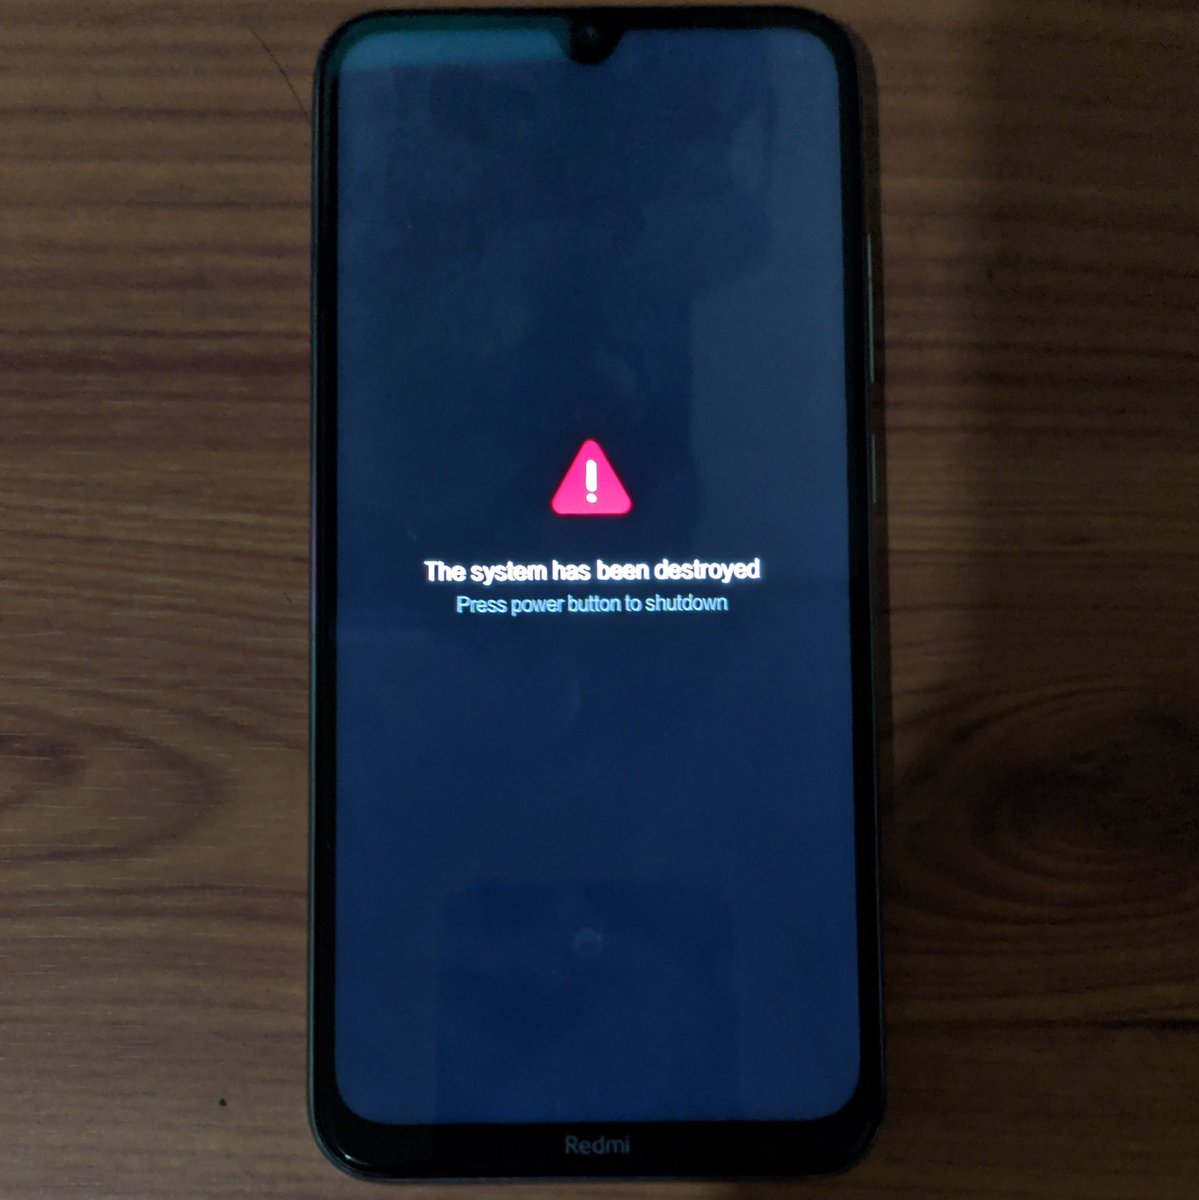 Fastboot redmi 8 pro. The System has been destroyed Xiaomi Redmi Note 9. The System has been destroyed Xiaomi Redmi 7a. Xiaomi кирпич the System has been. The System has been destroyed.